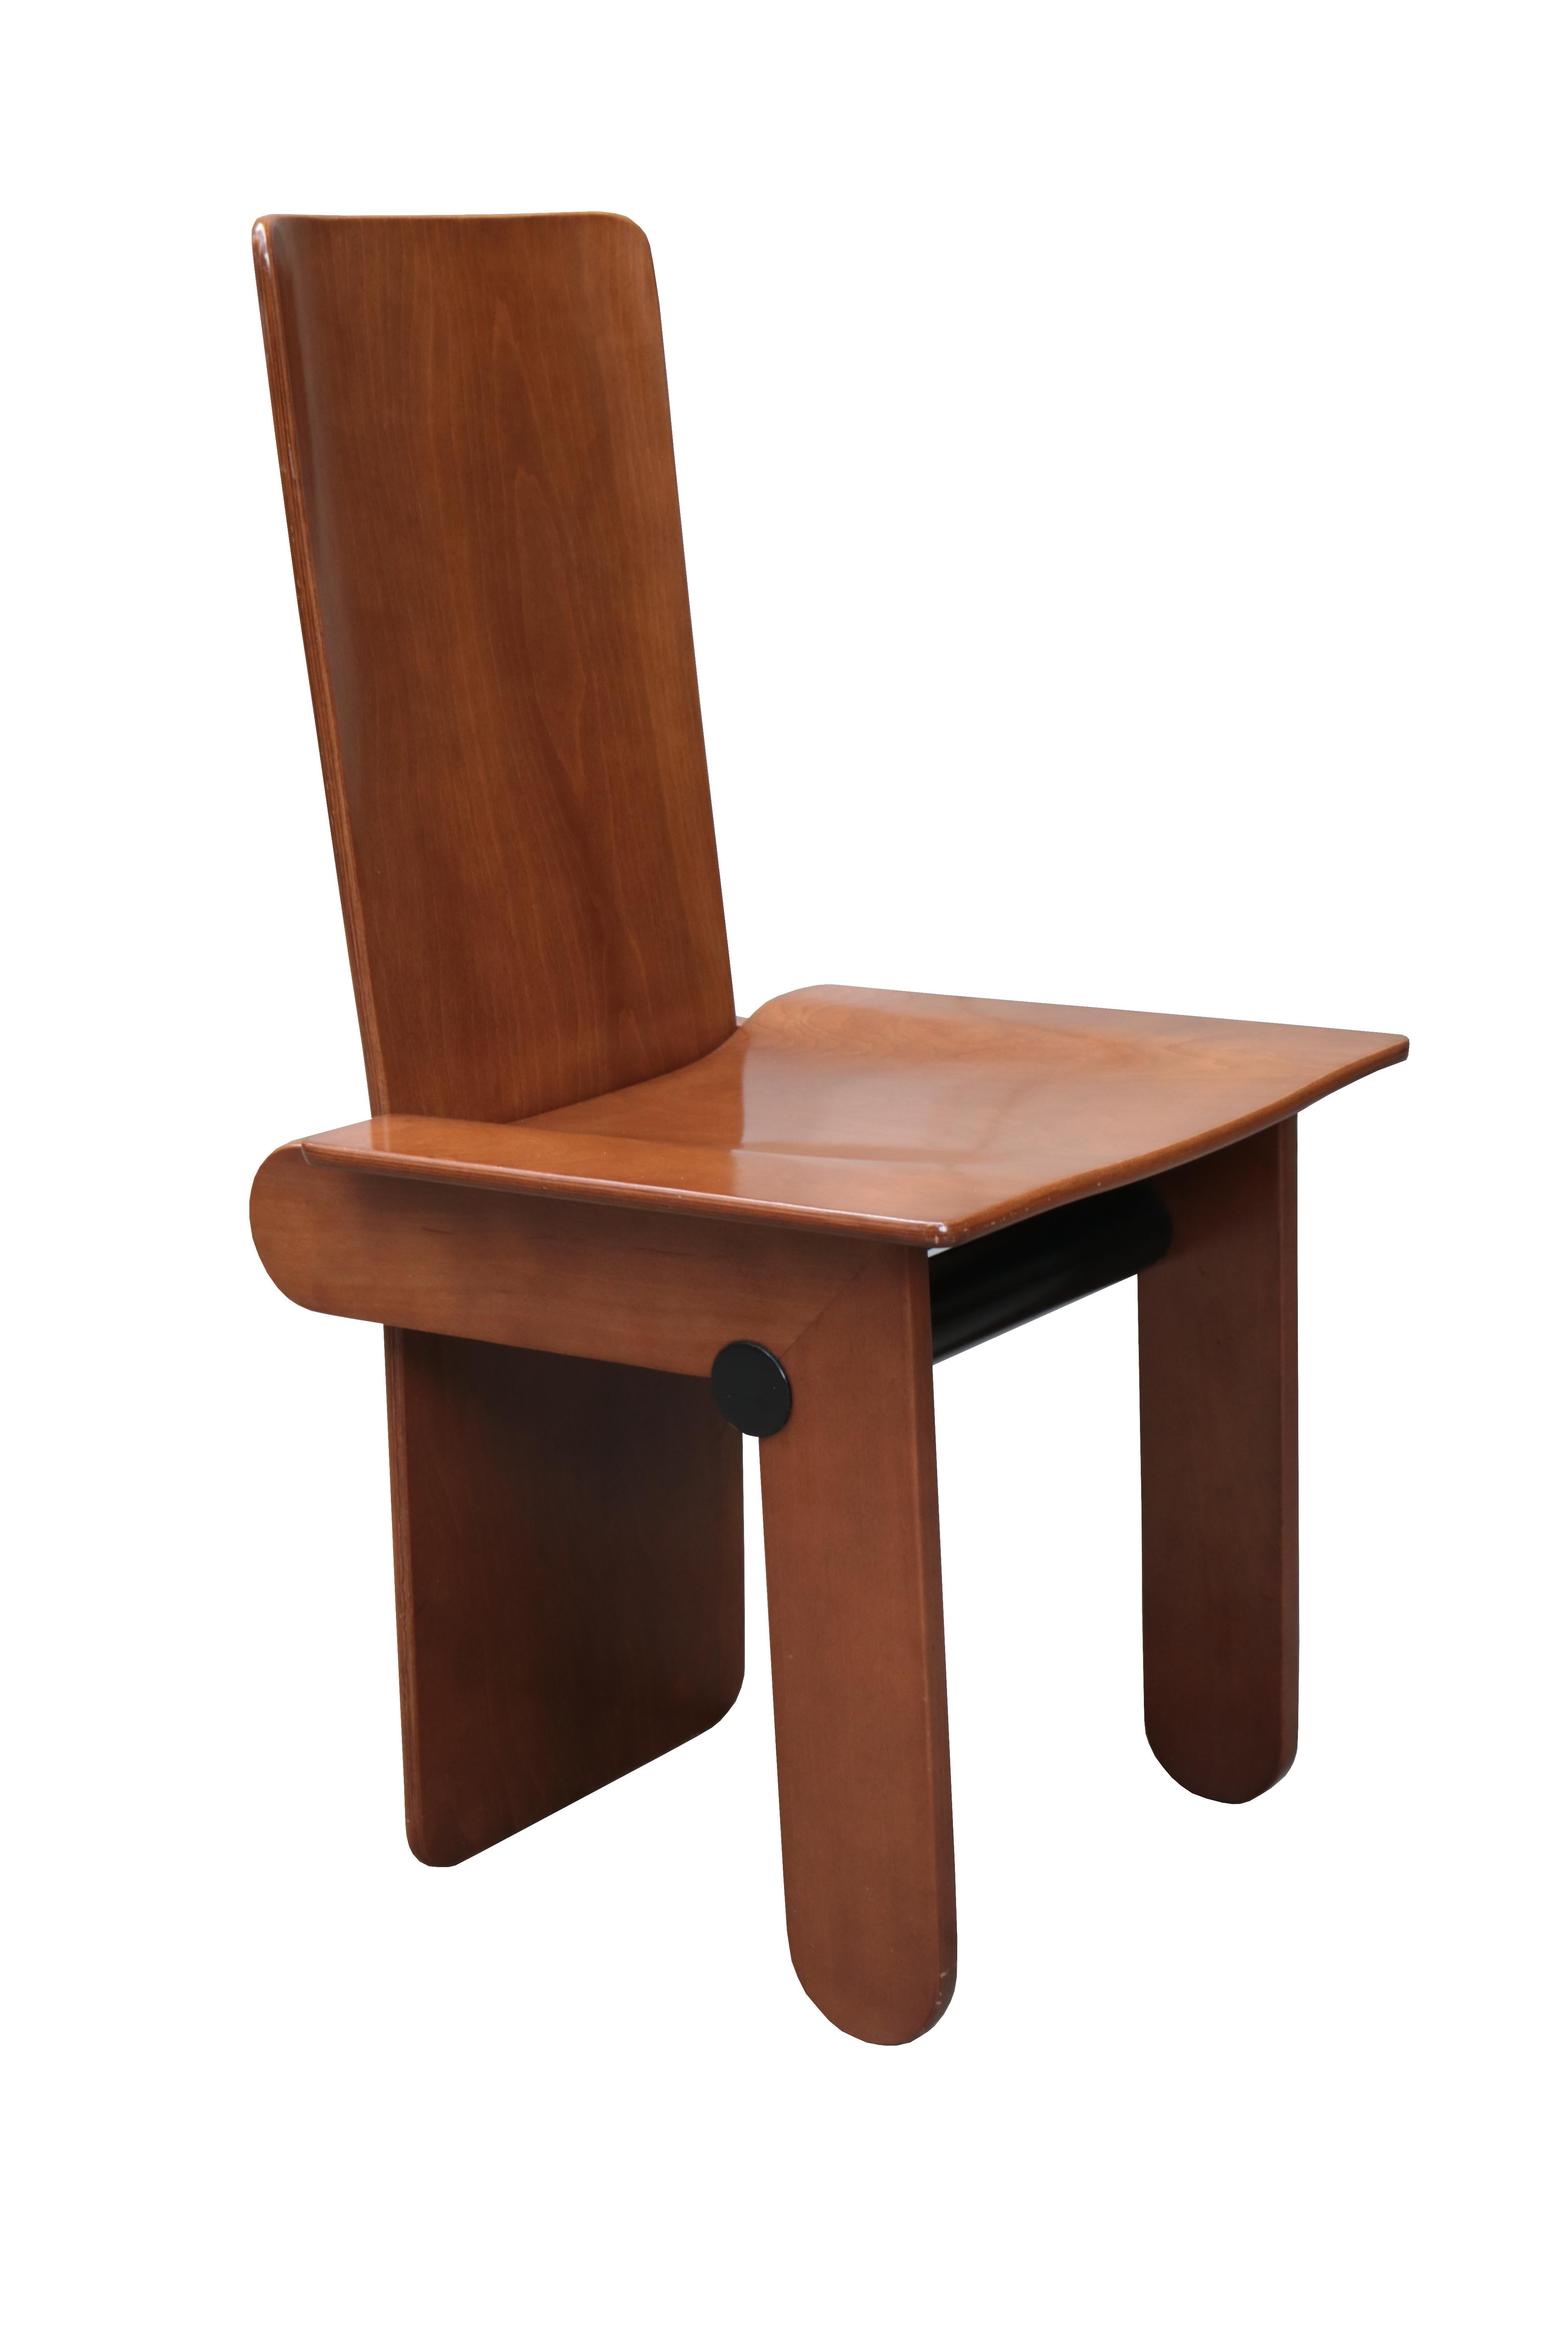 A set of six Modernist dining chairs designed by Carlo Scarpa for Gavina. 
Stained pine wood with ebonized details.